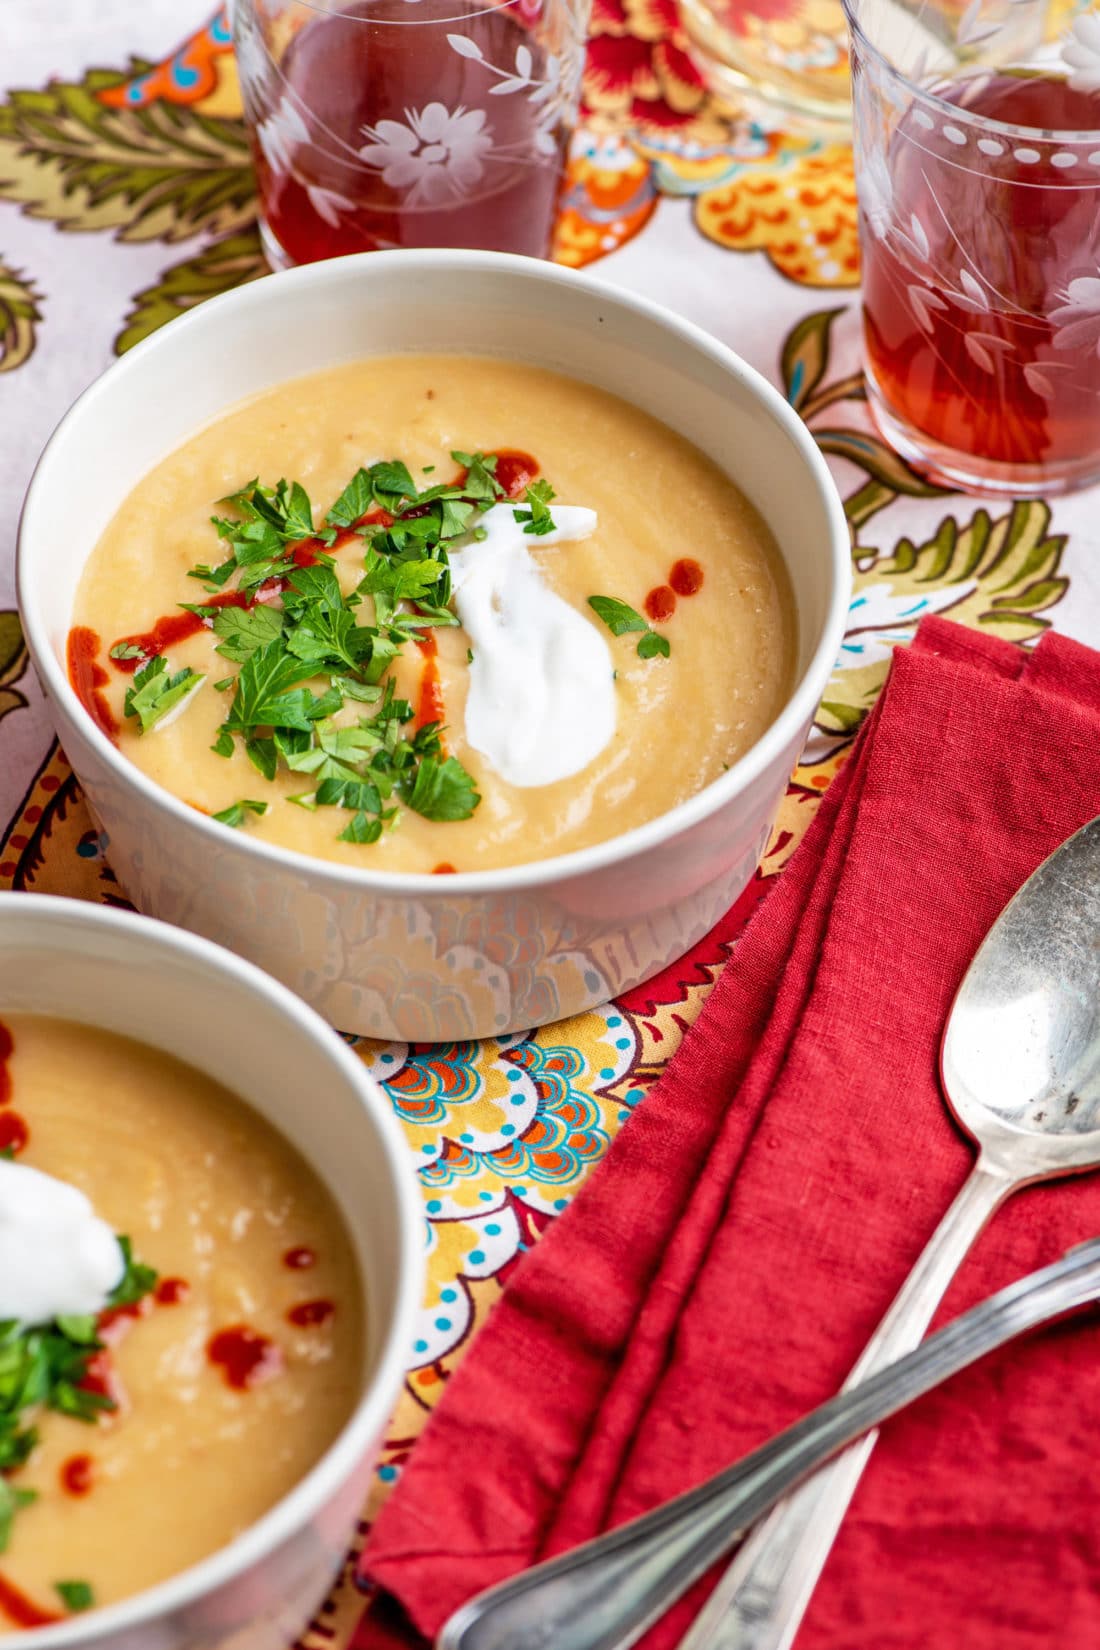 Creamy Rutabaga, Parsnip and Cheddar Soup